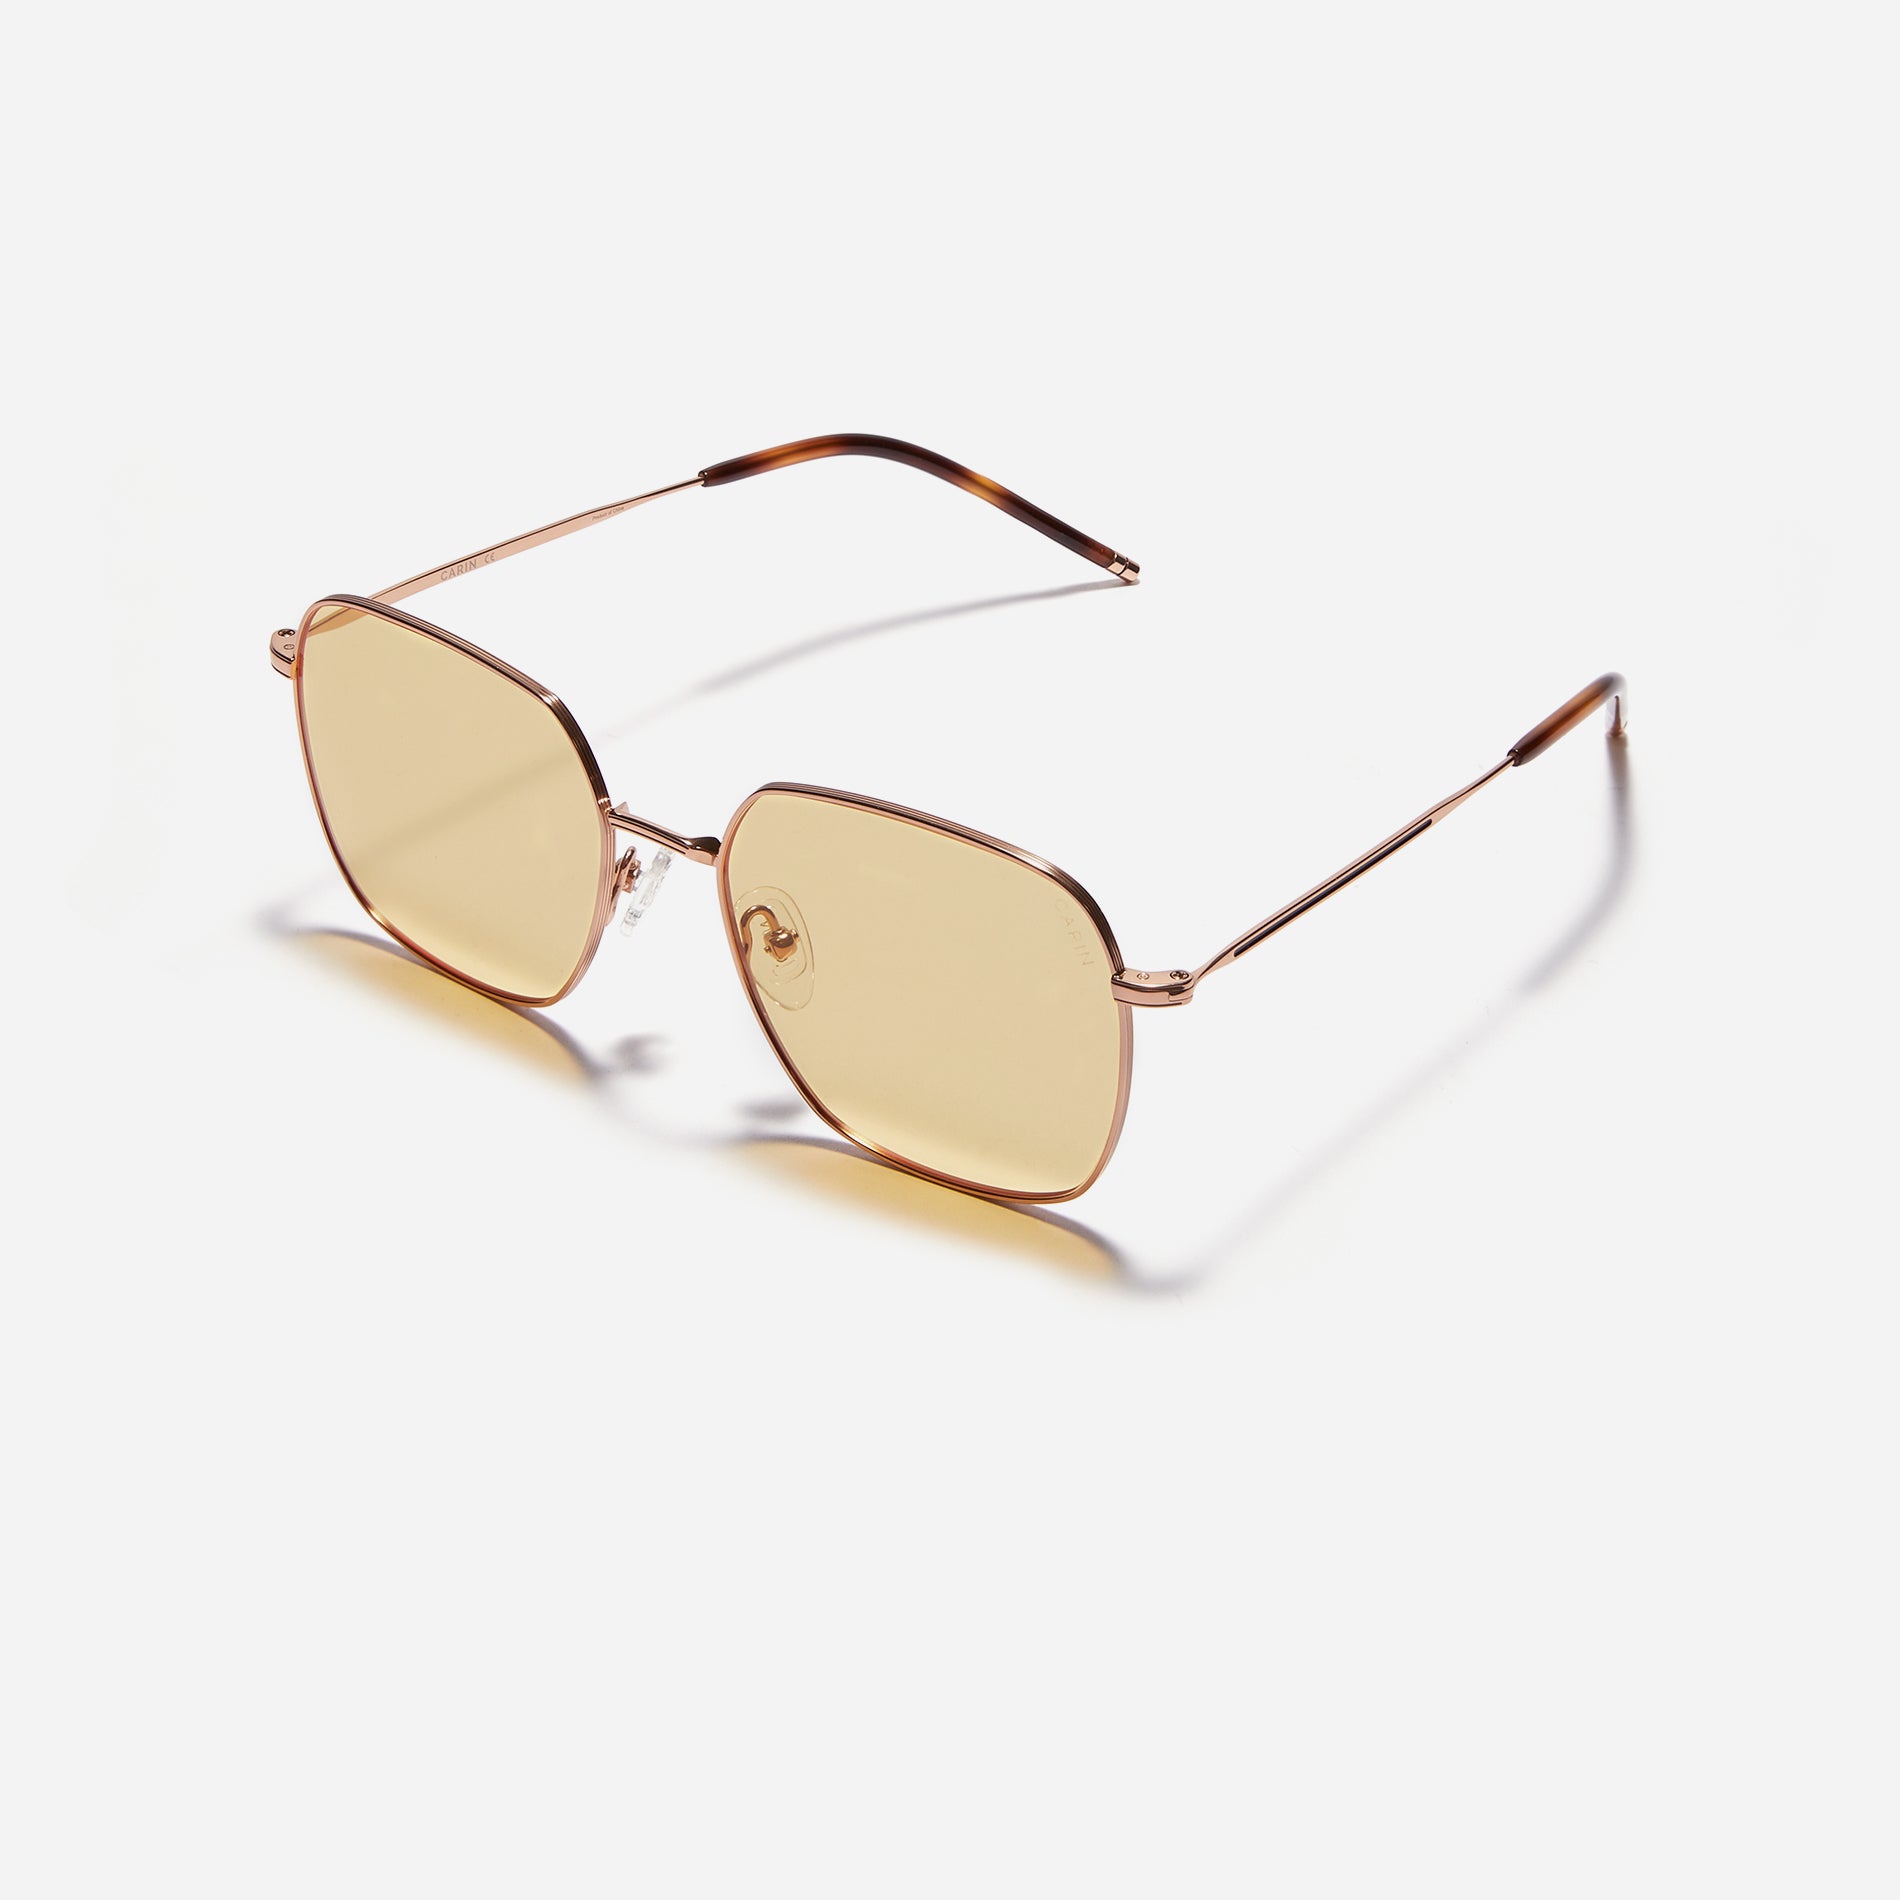 Retro aesthetic square-shaped sunglasses crafted entirely from titanium.